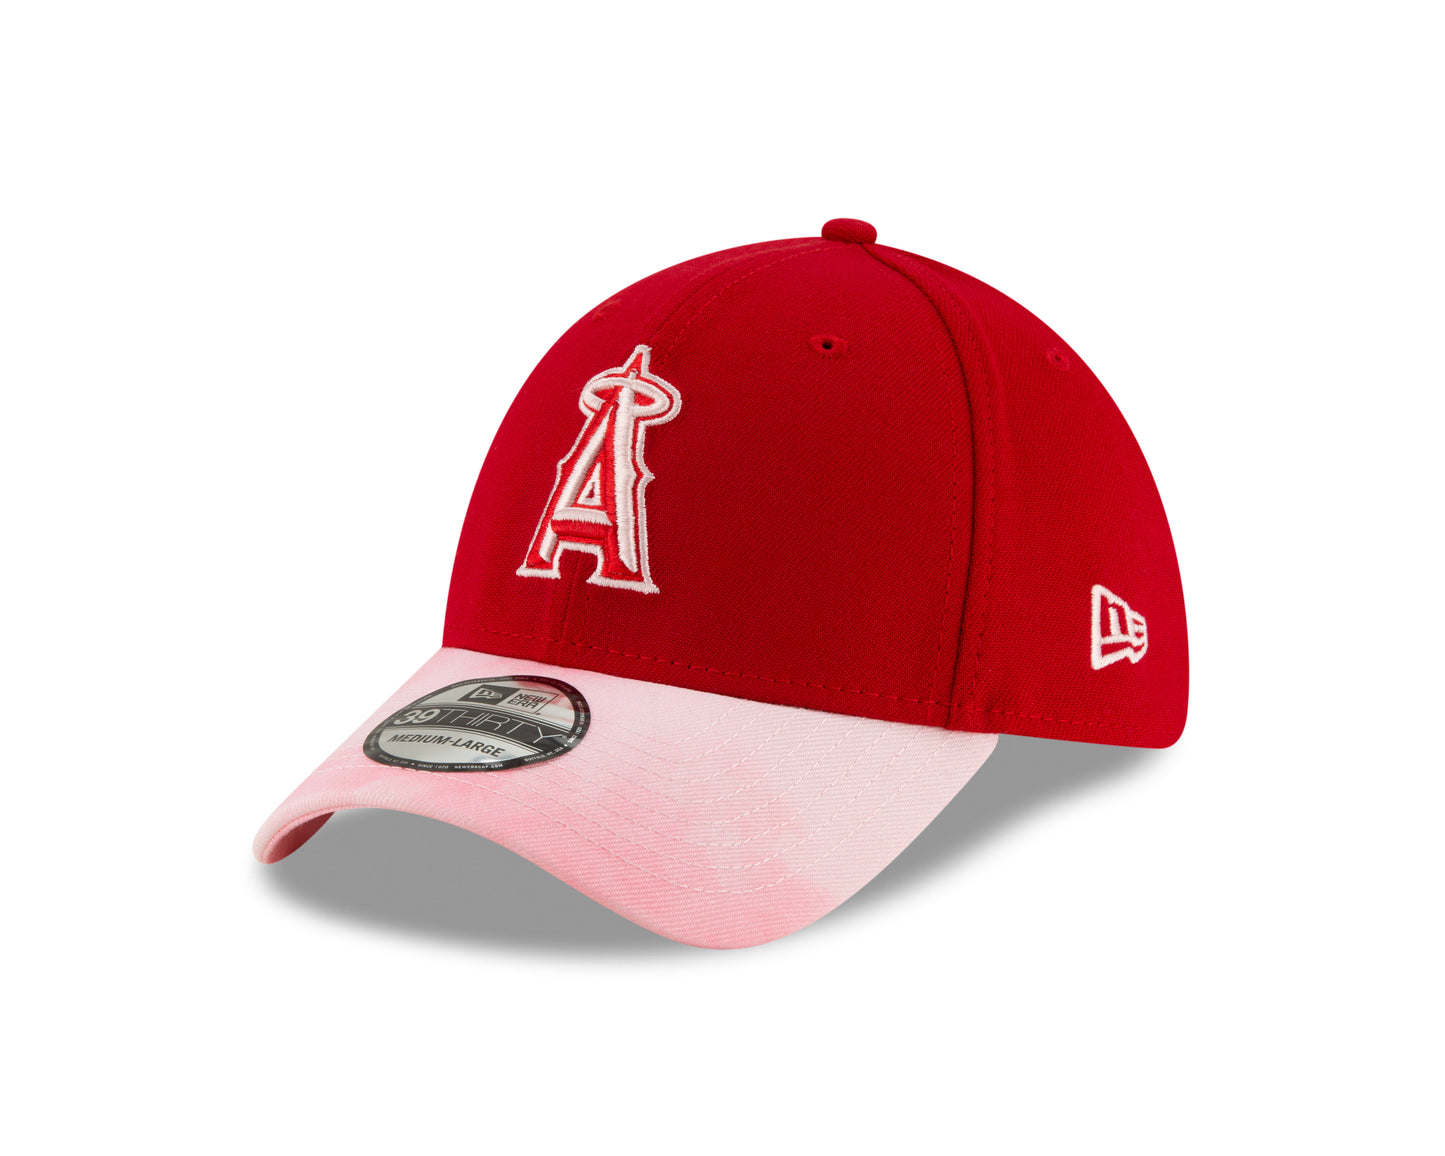 Los Angeles Angels New Era Mother's Day 39THIRTY Flex Hat - Red/Pink